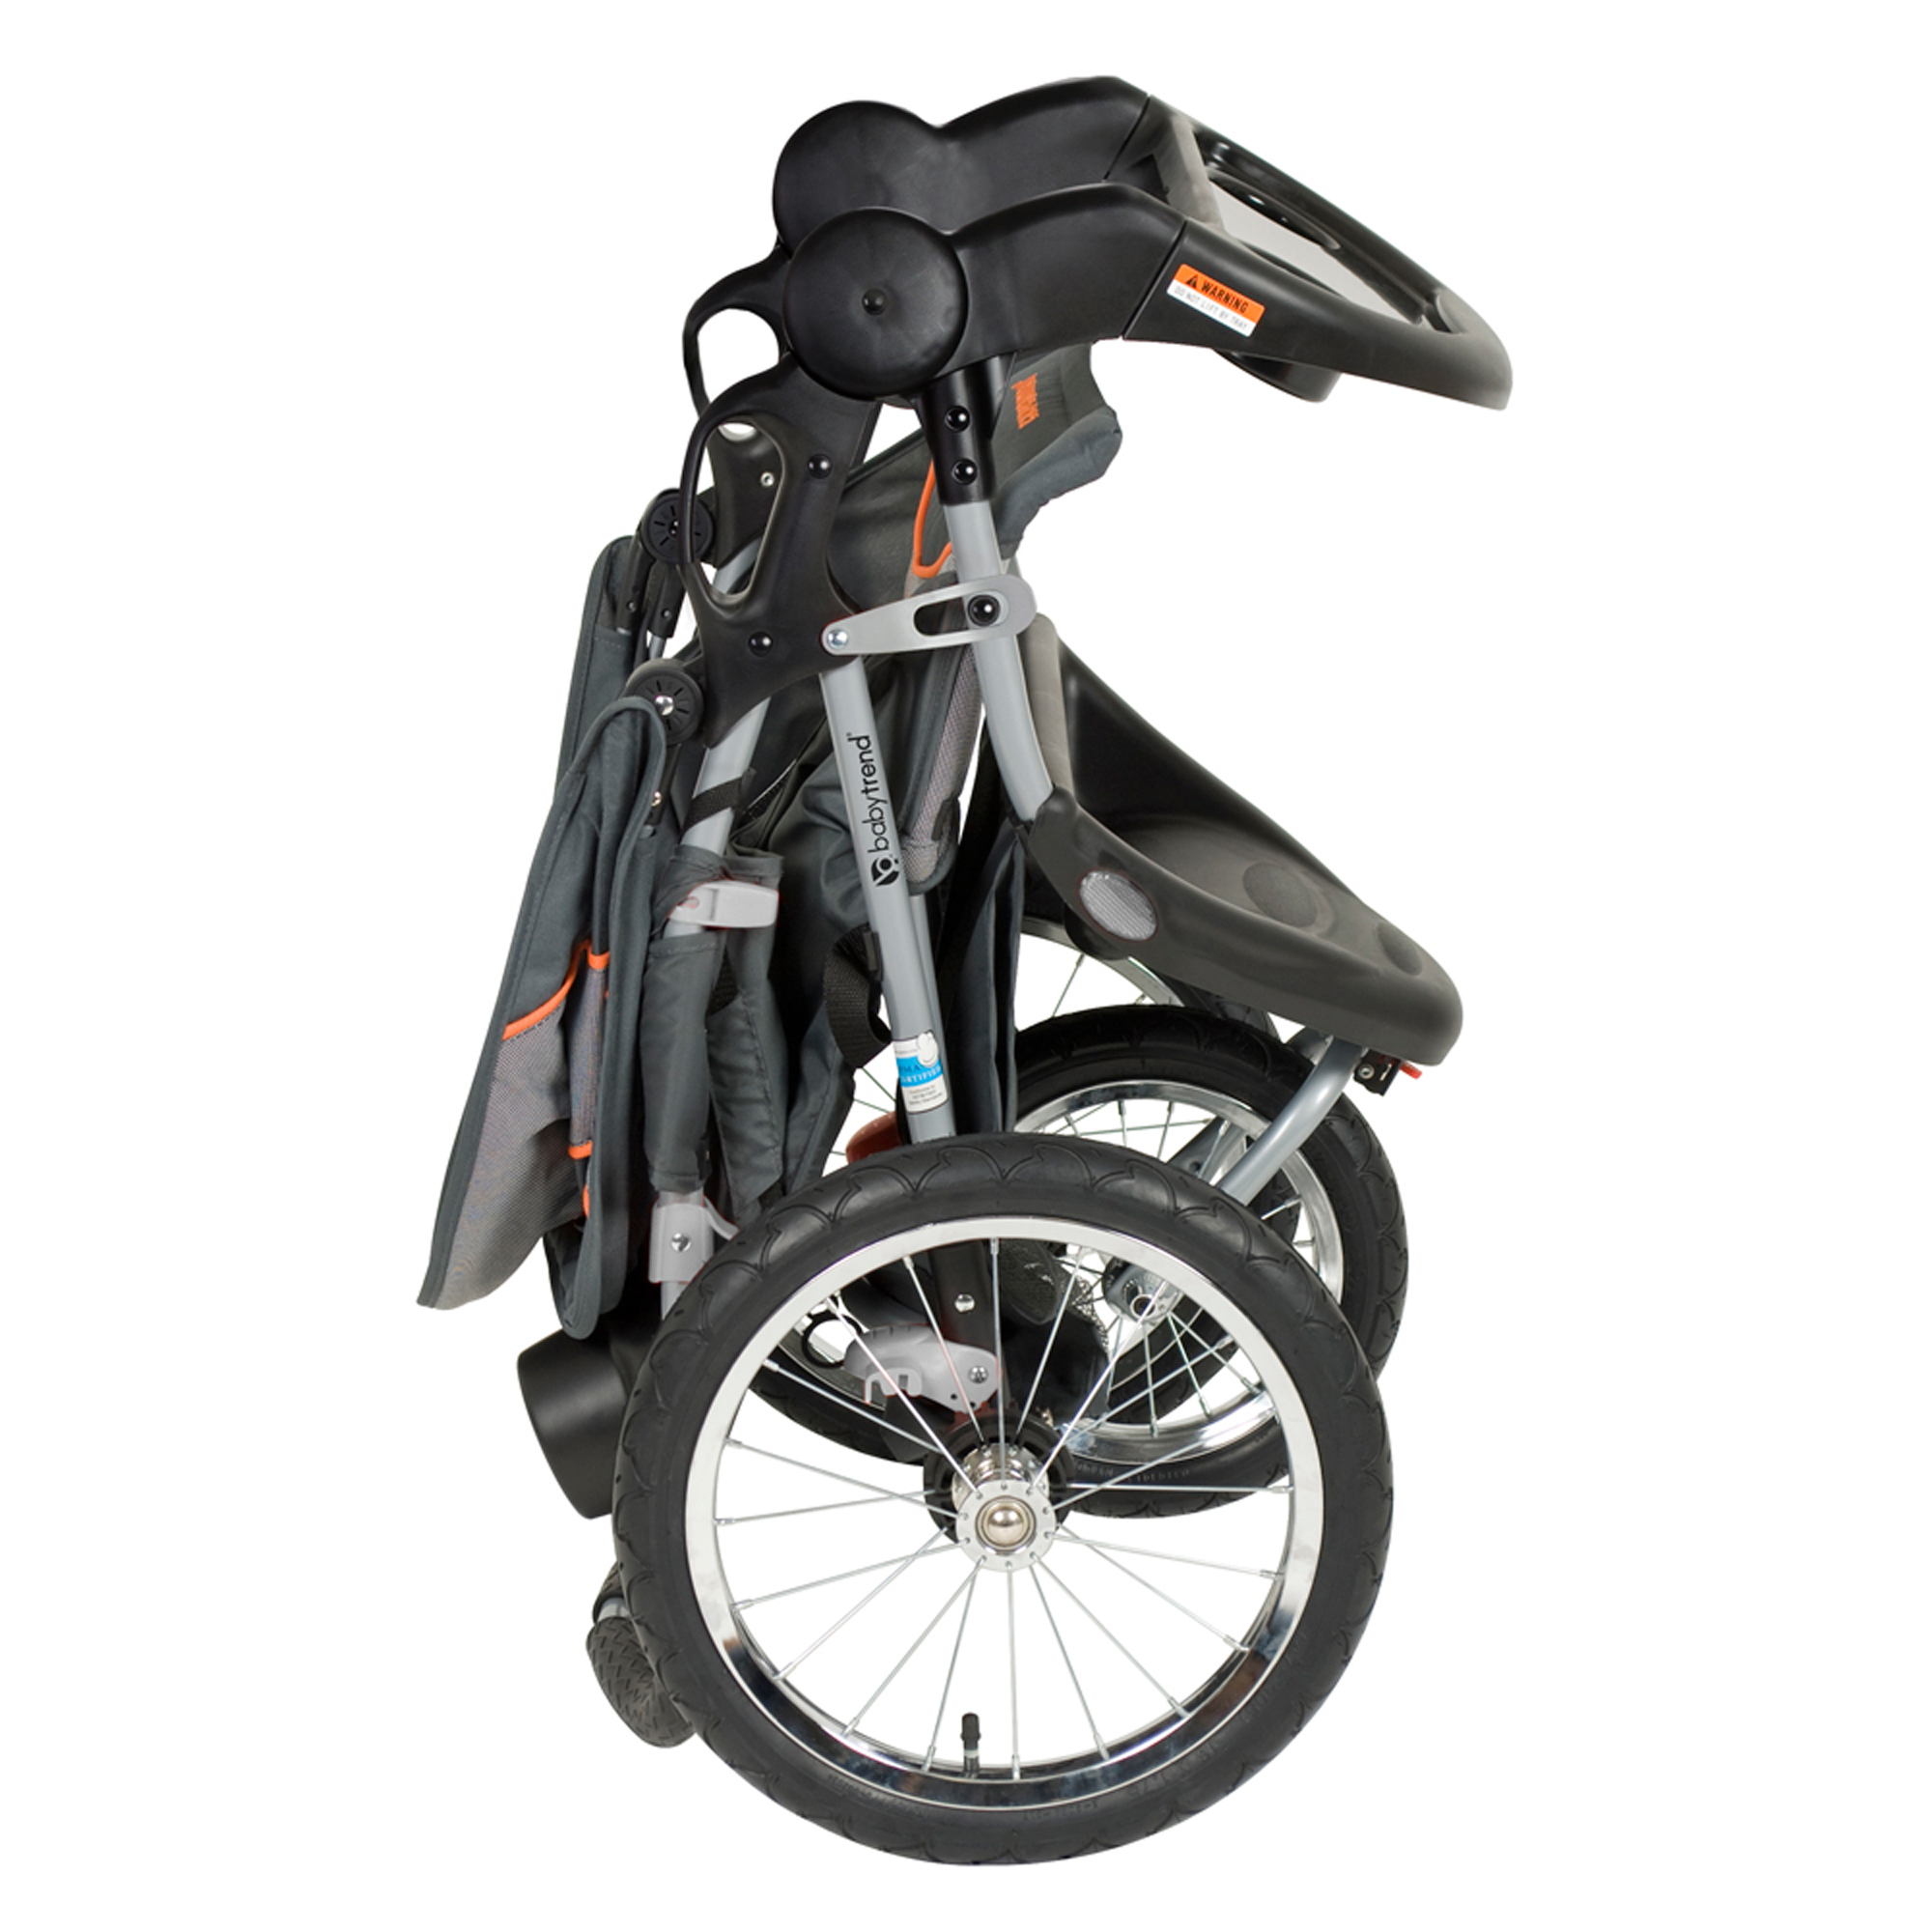 Baby Trend Expedition Jogging Stroller, Vanguard - image 5 of 6